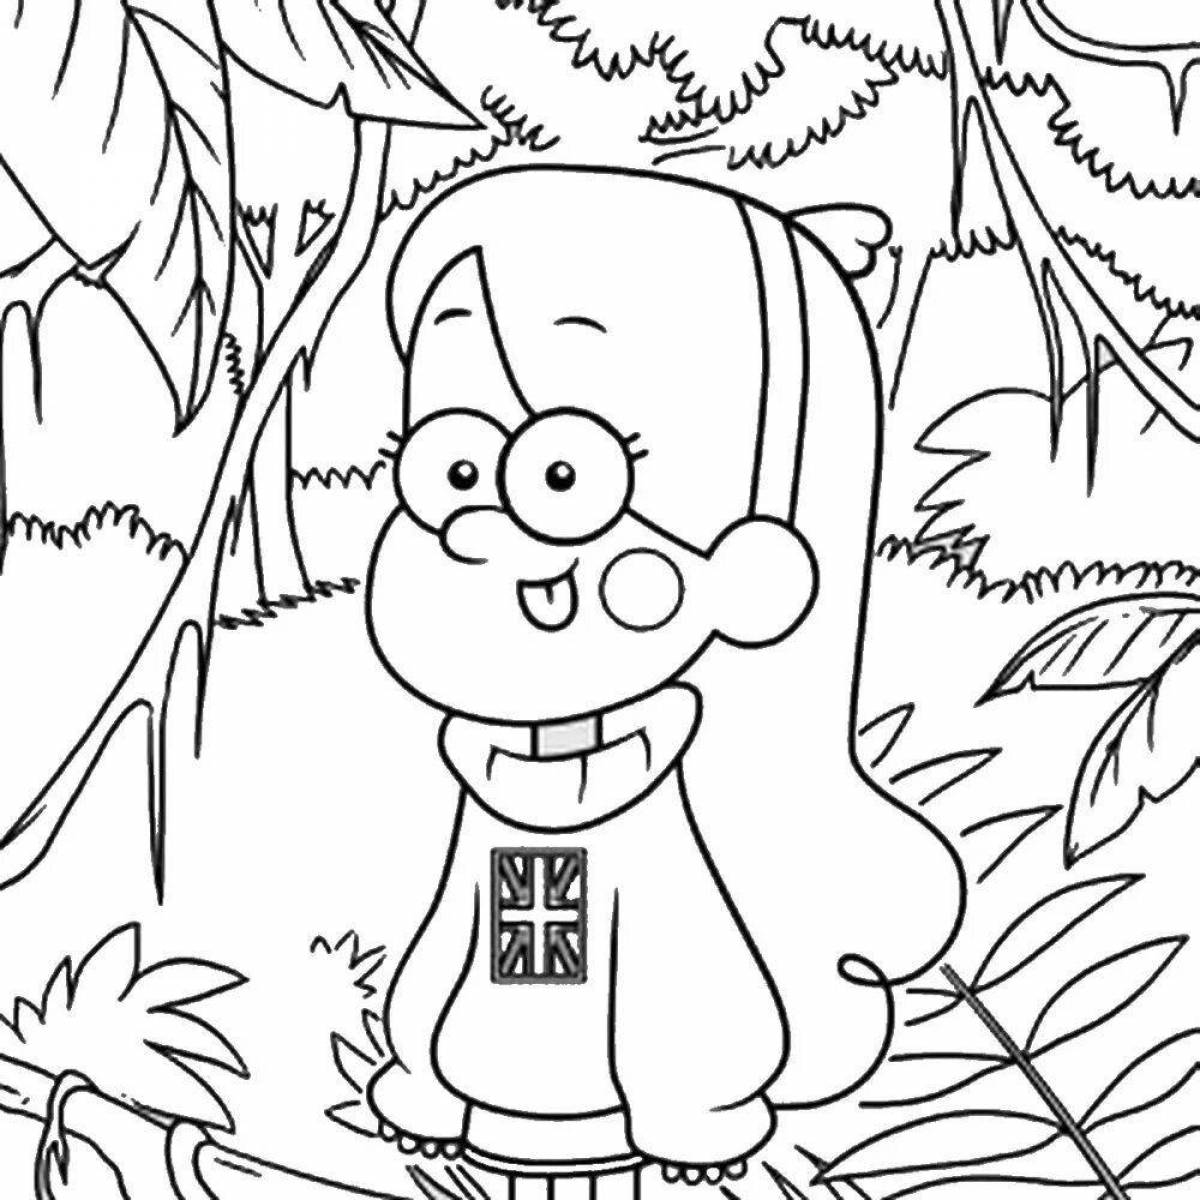 Color-frenzy coloring page для 11-летних